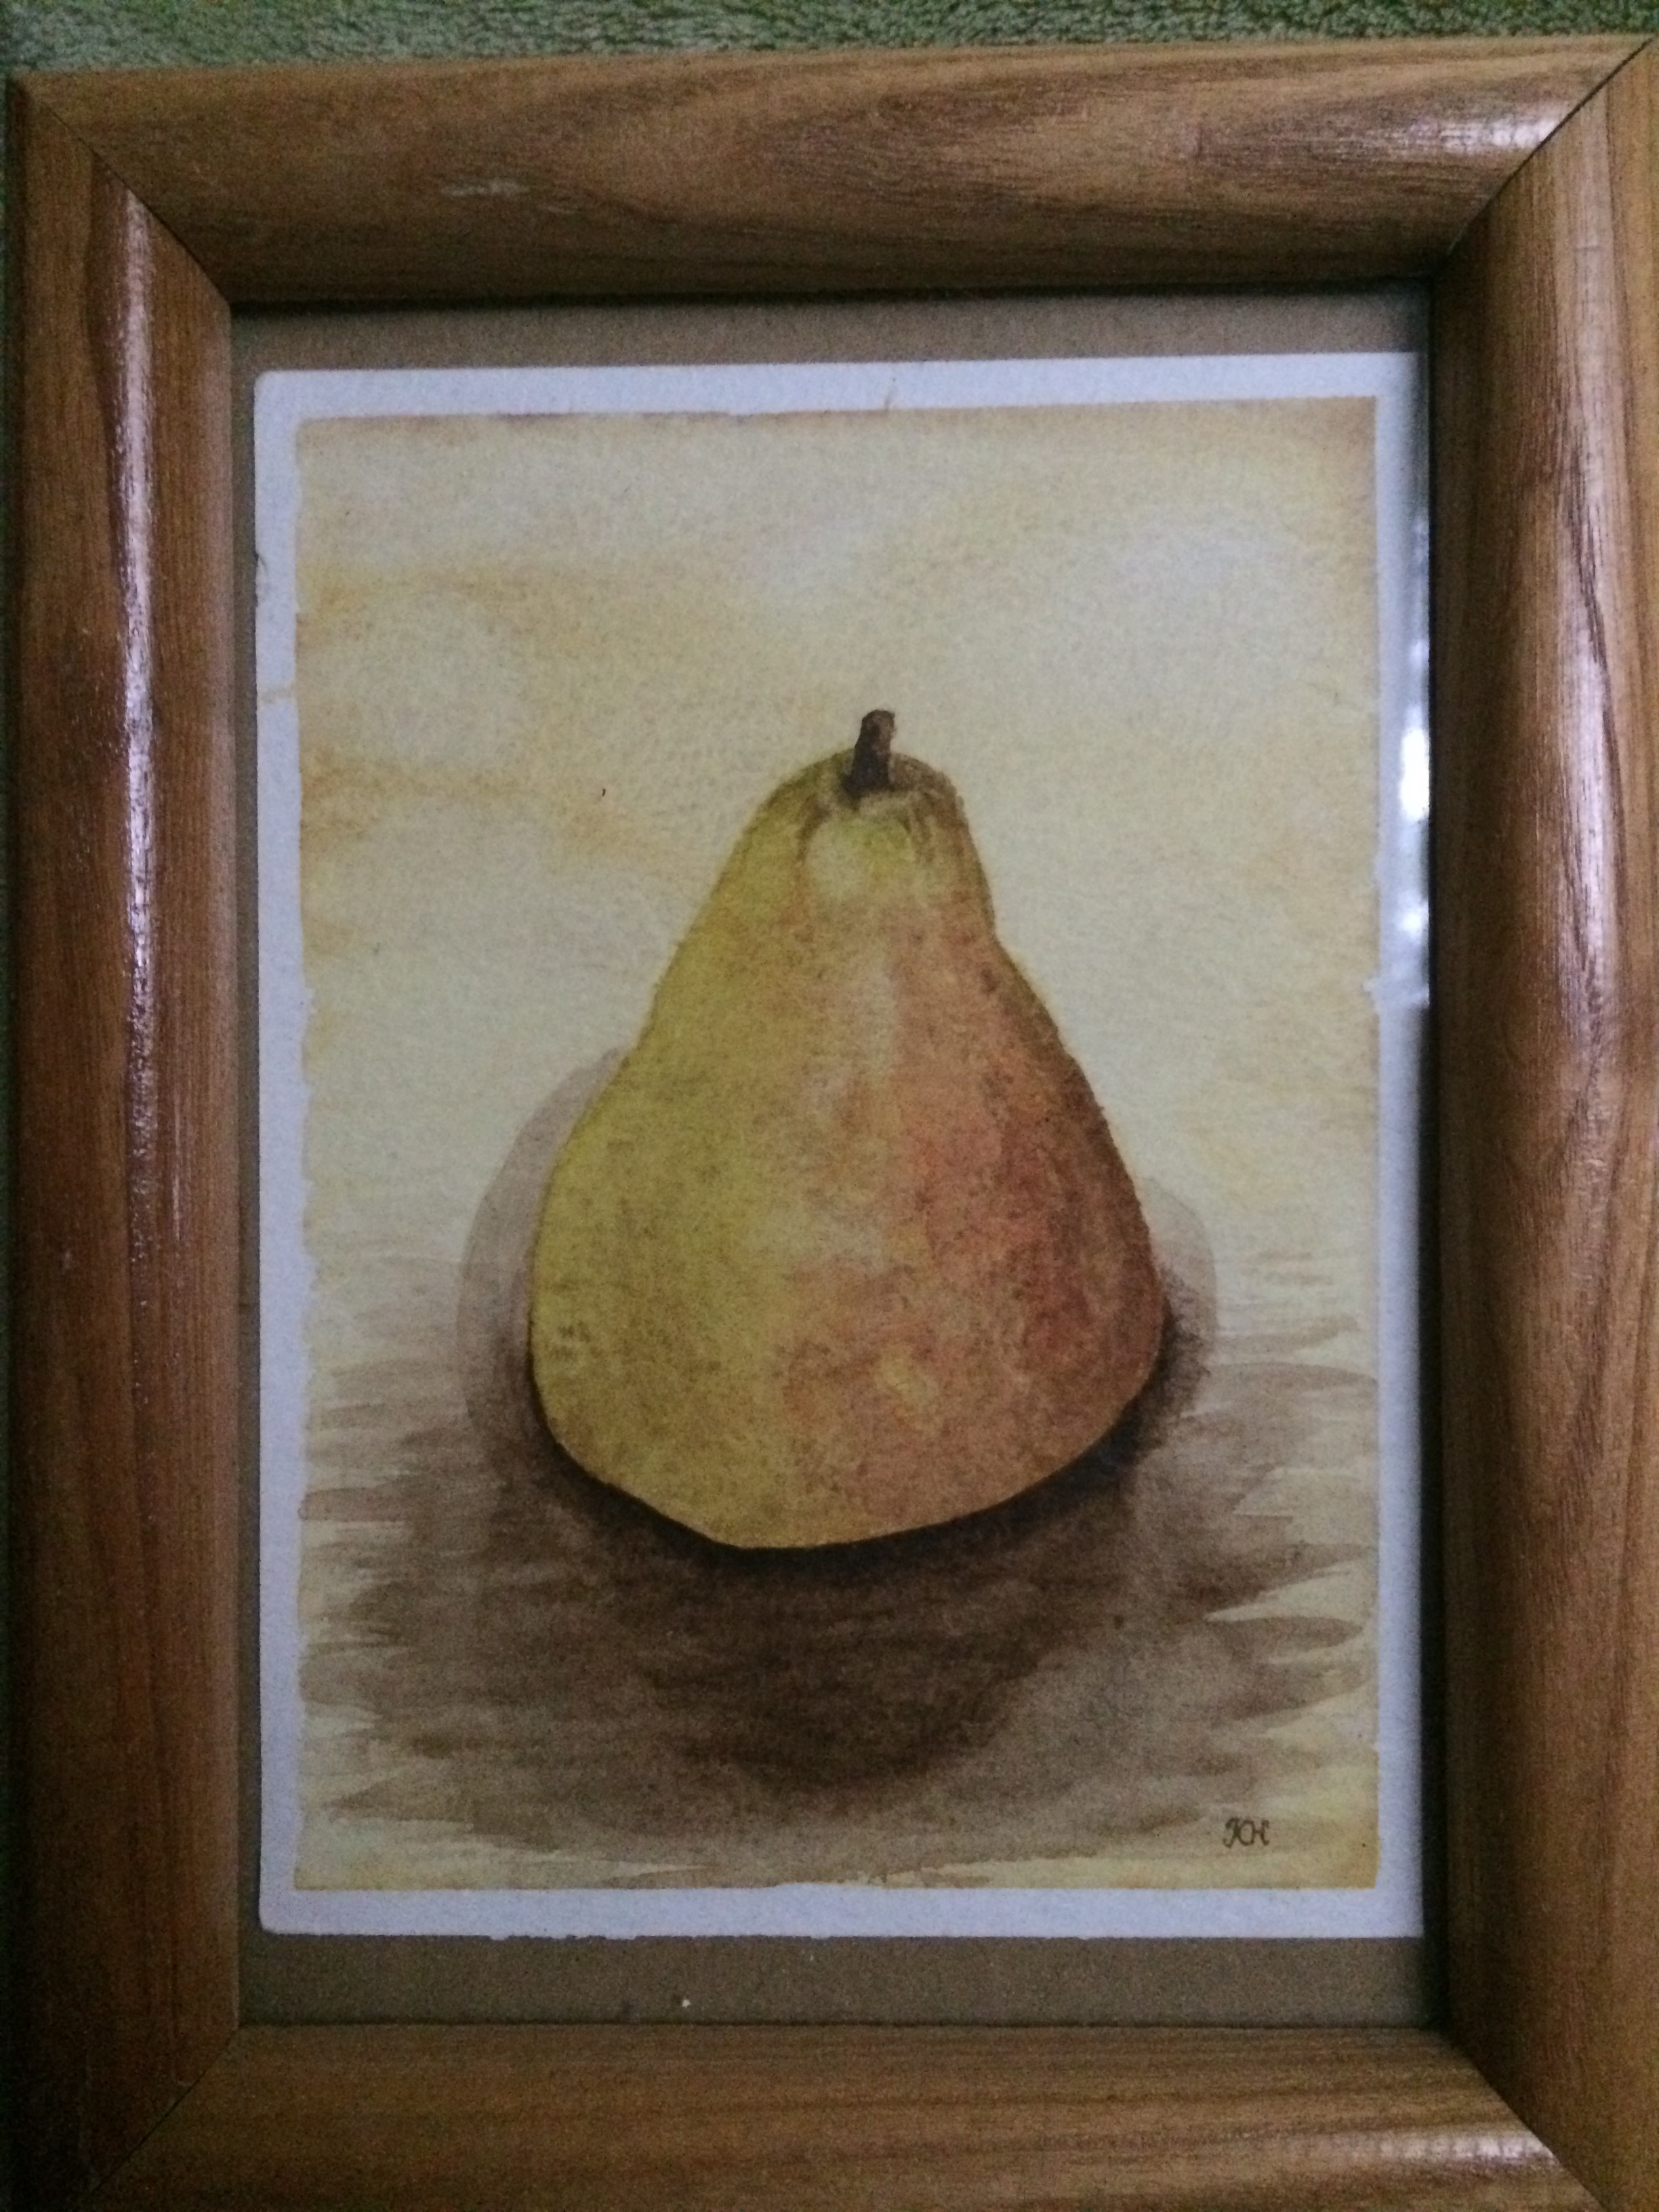 It is the Pear!